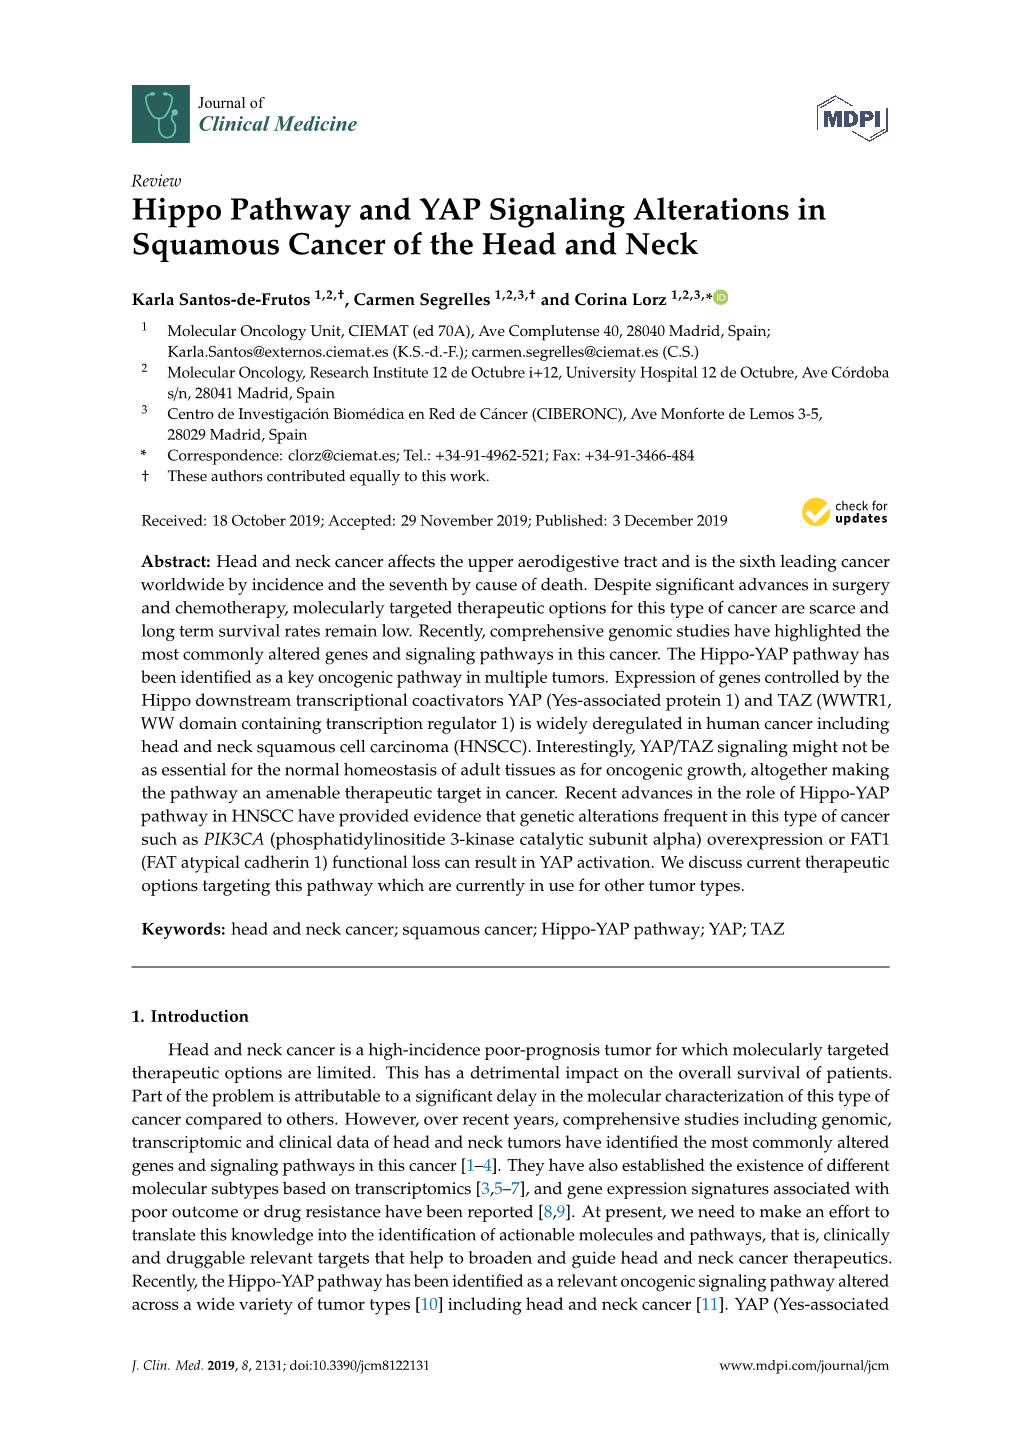 Hippo Pathway and YAP Signaling Alterations in Squamous Cancer of the Head and Neck